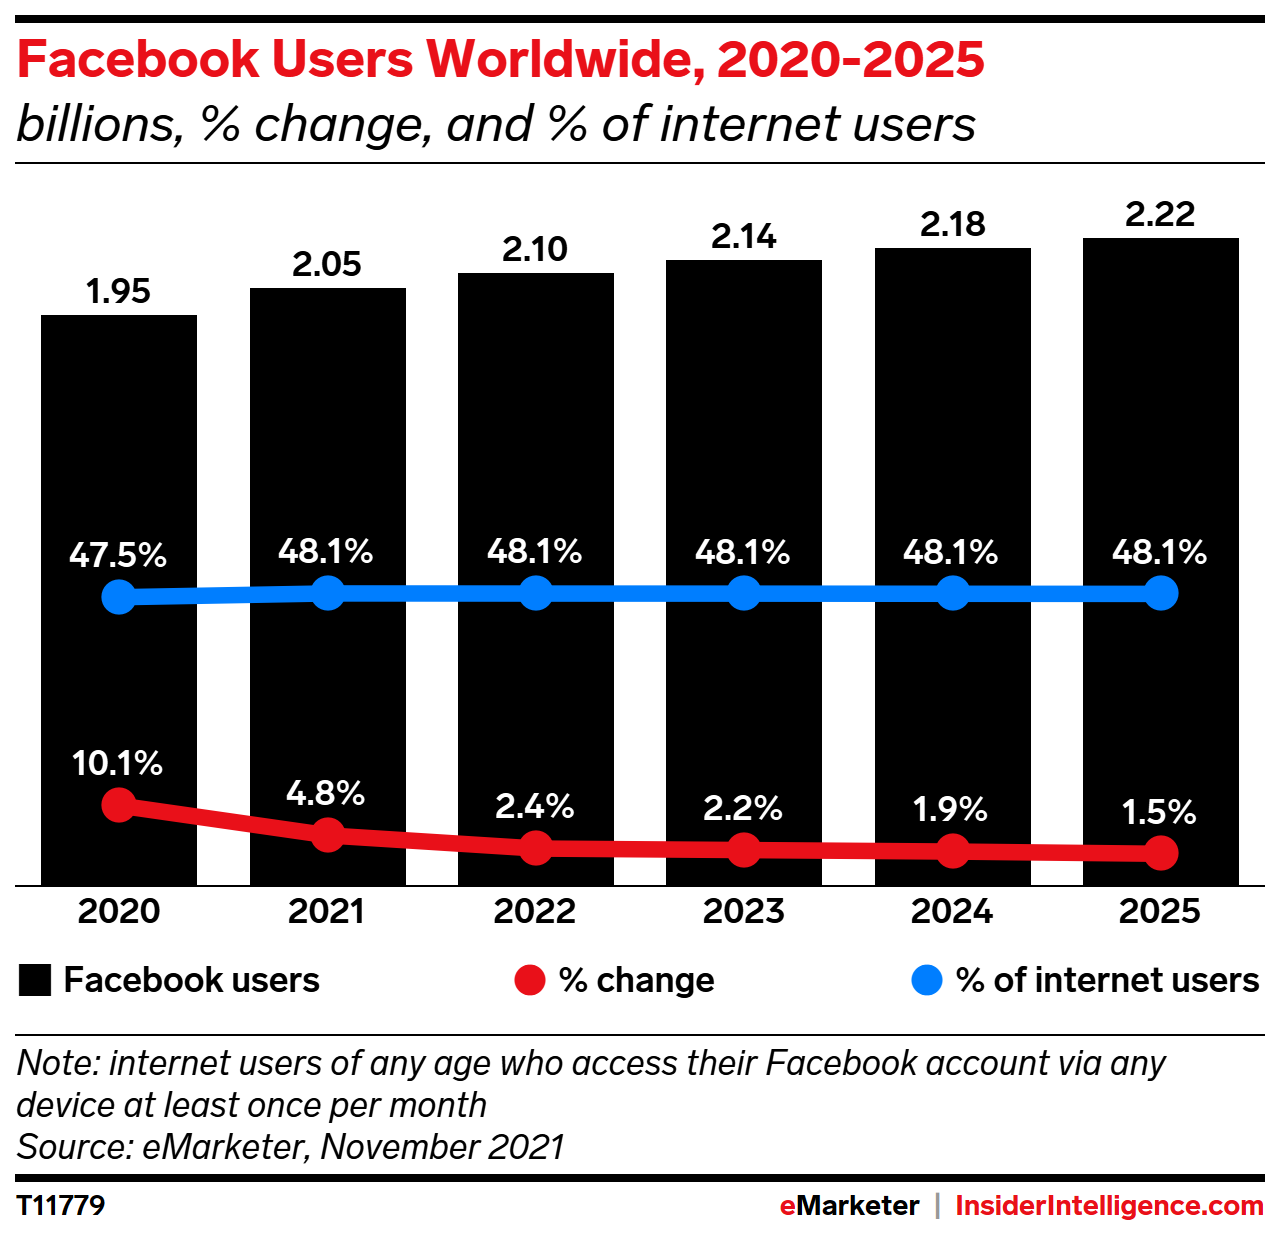 Facebook Users Worldwide, 2020-2025 (millions, % change, and % of internet users)